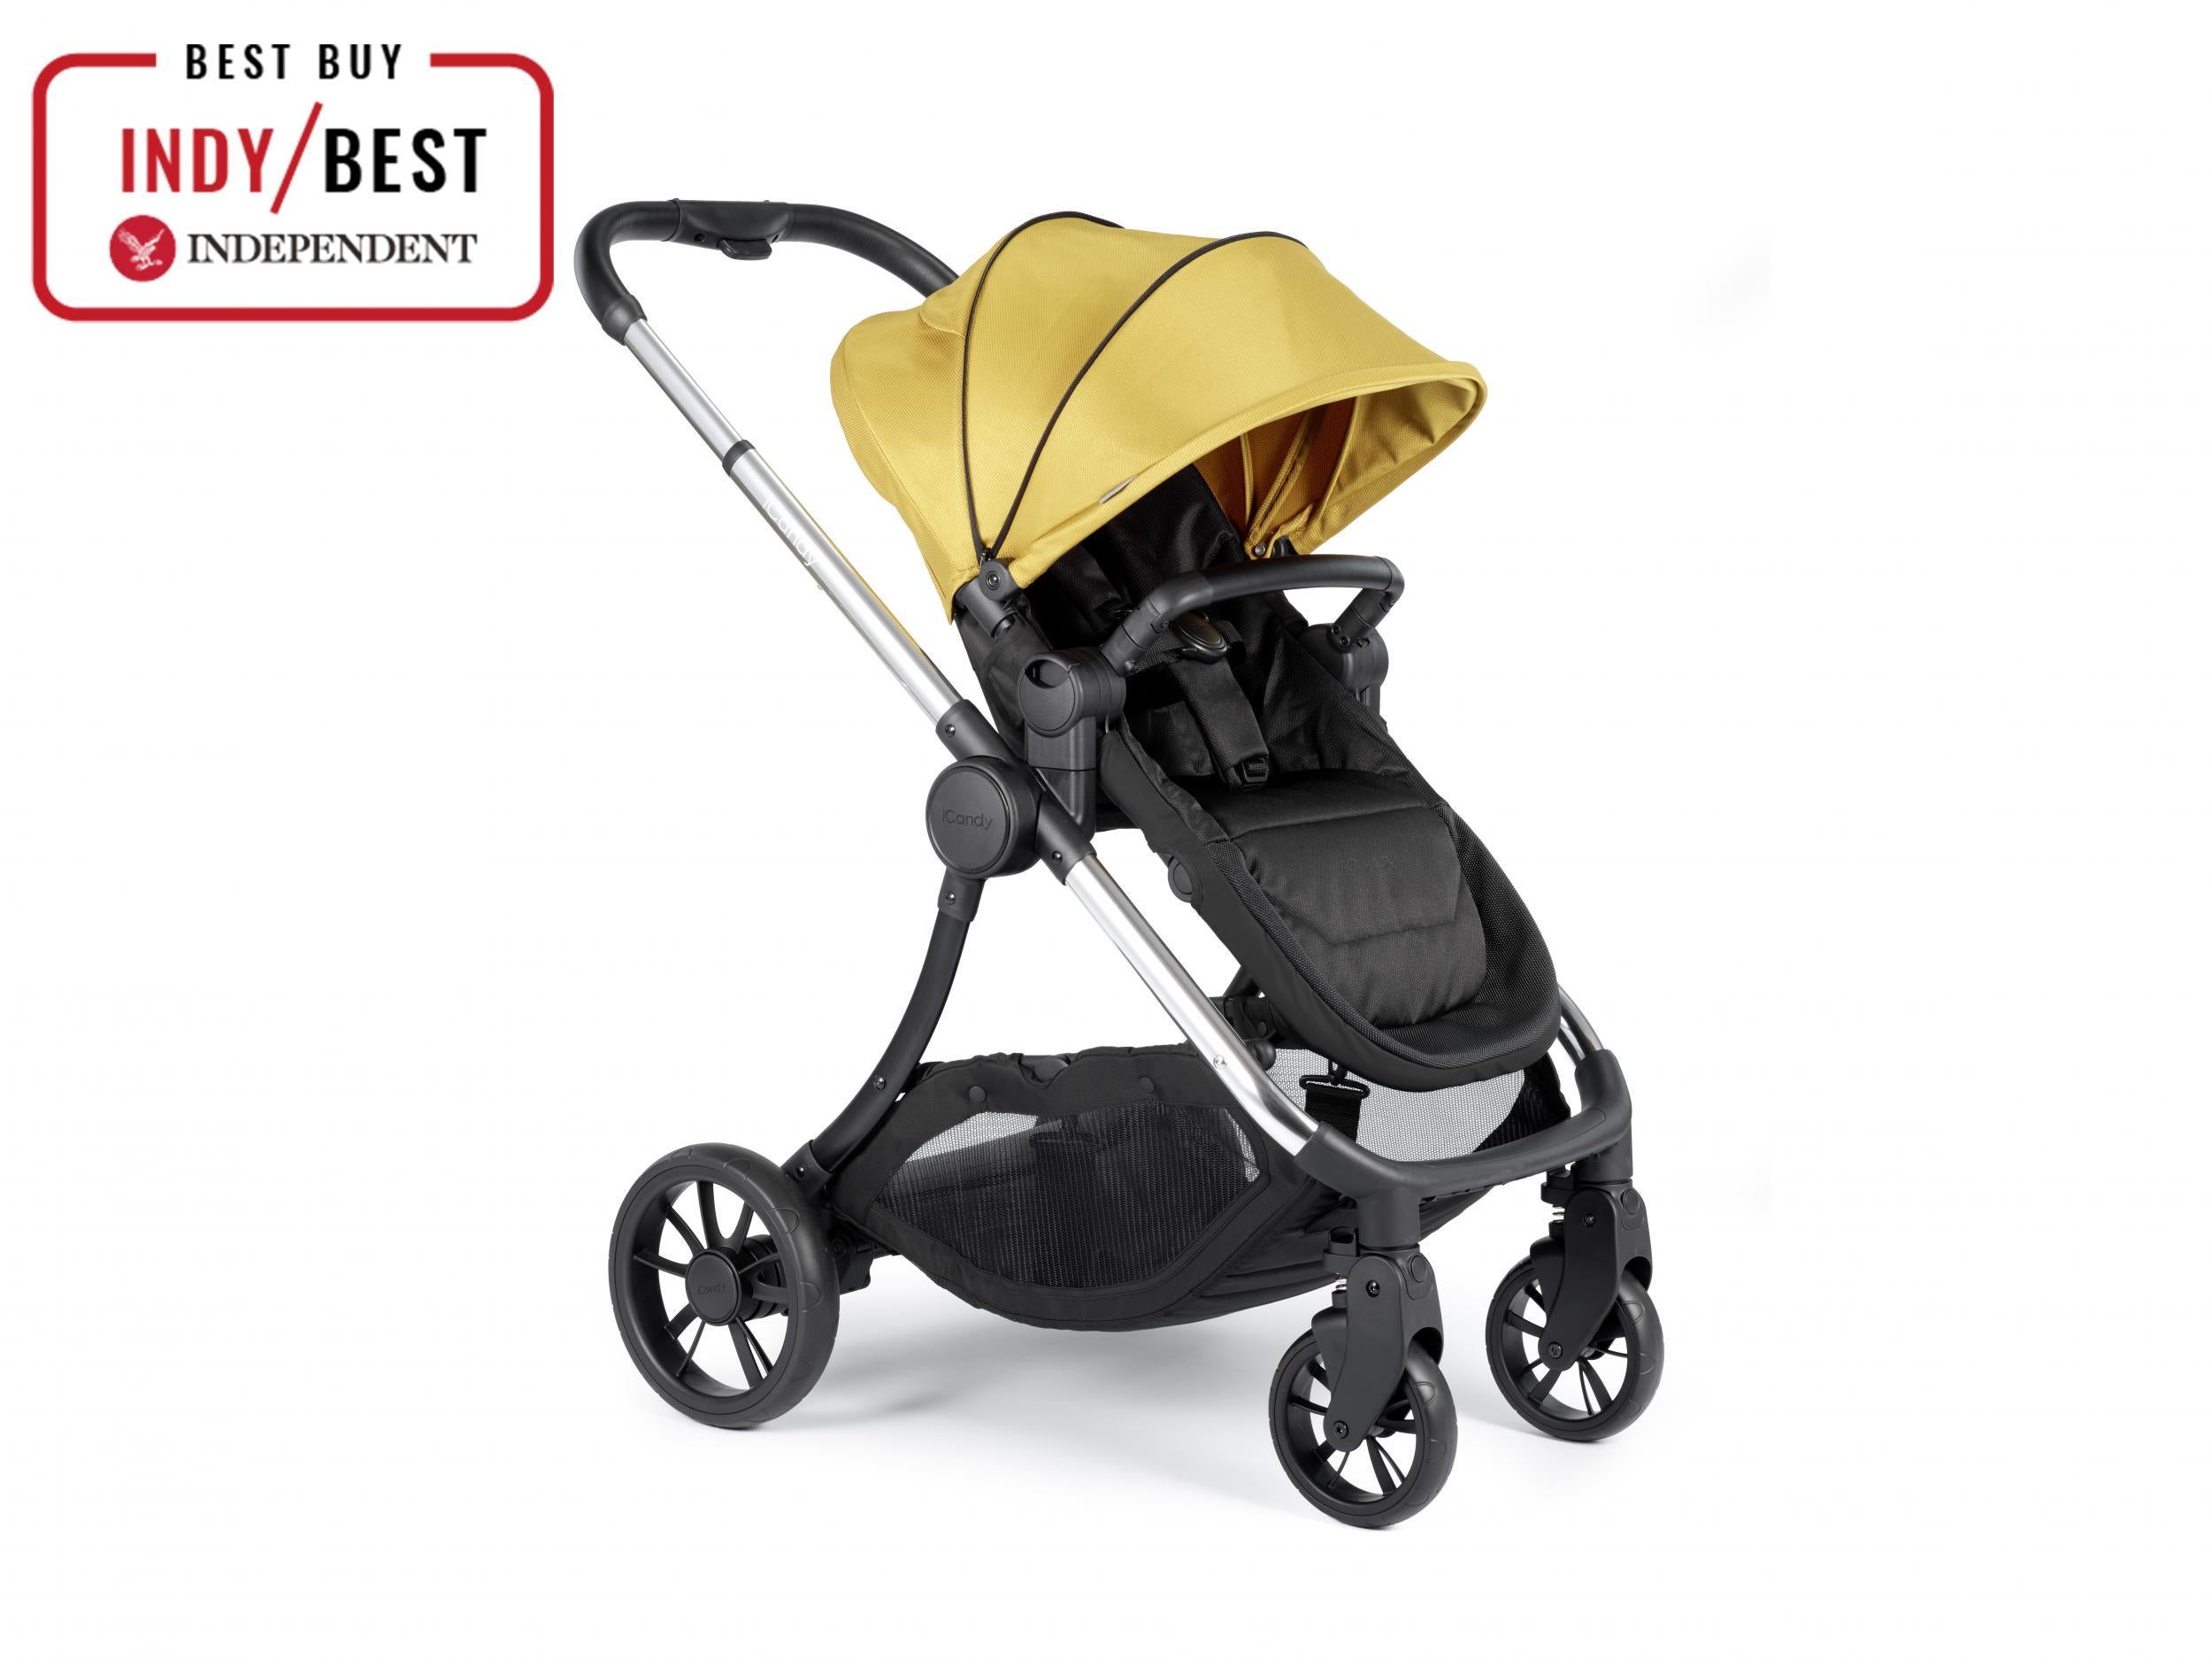 compare pushchairs uk